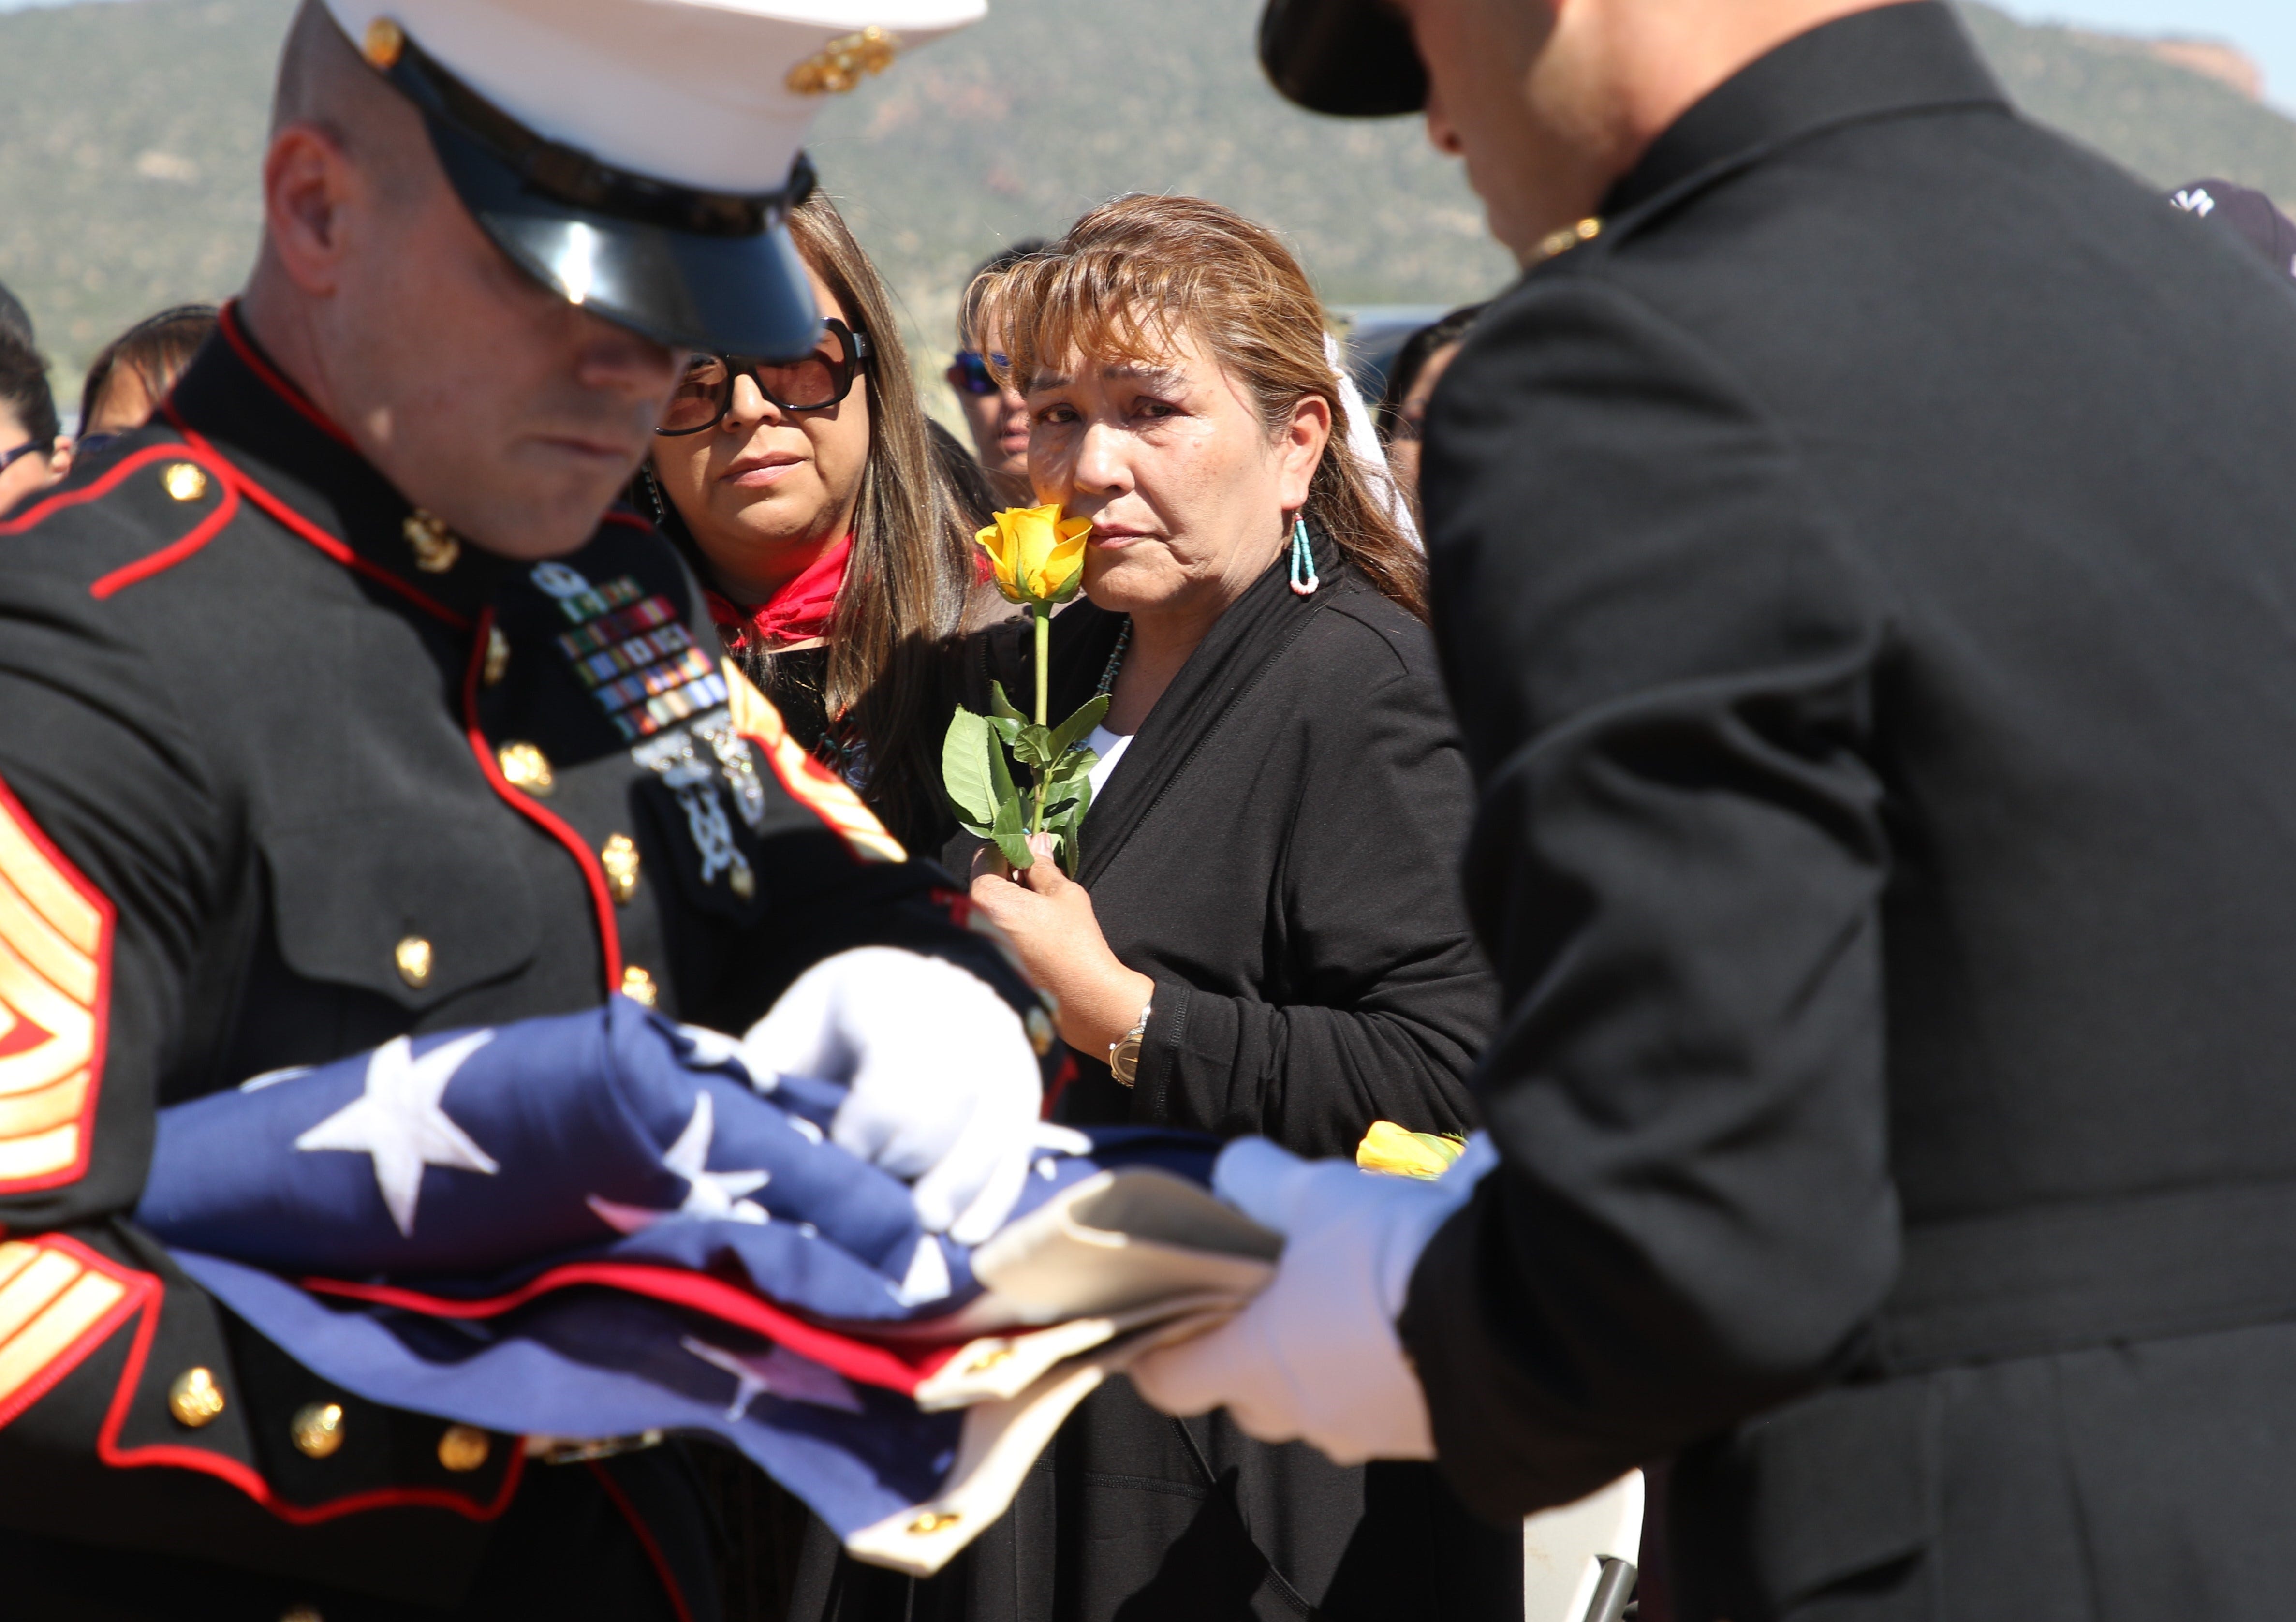 Vee F. Browne-Yellowhair, center, watches U.S. Marine Corps members fold the burial flag for her father, Navajo Code Talker William Tully Brown Sr., on June 6 at the Fort Defiance Veterans Cemetery in Fort Defiance, Ariz.